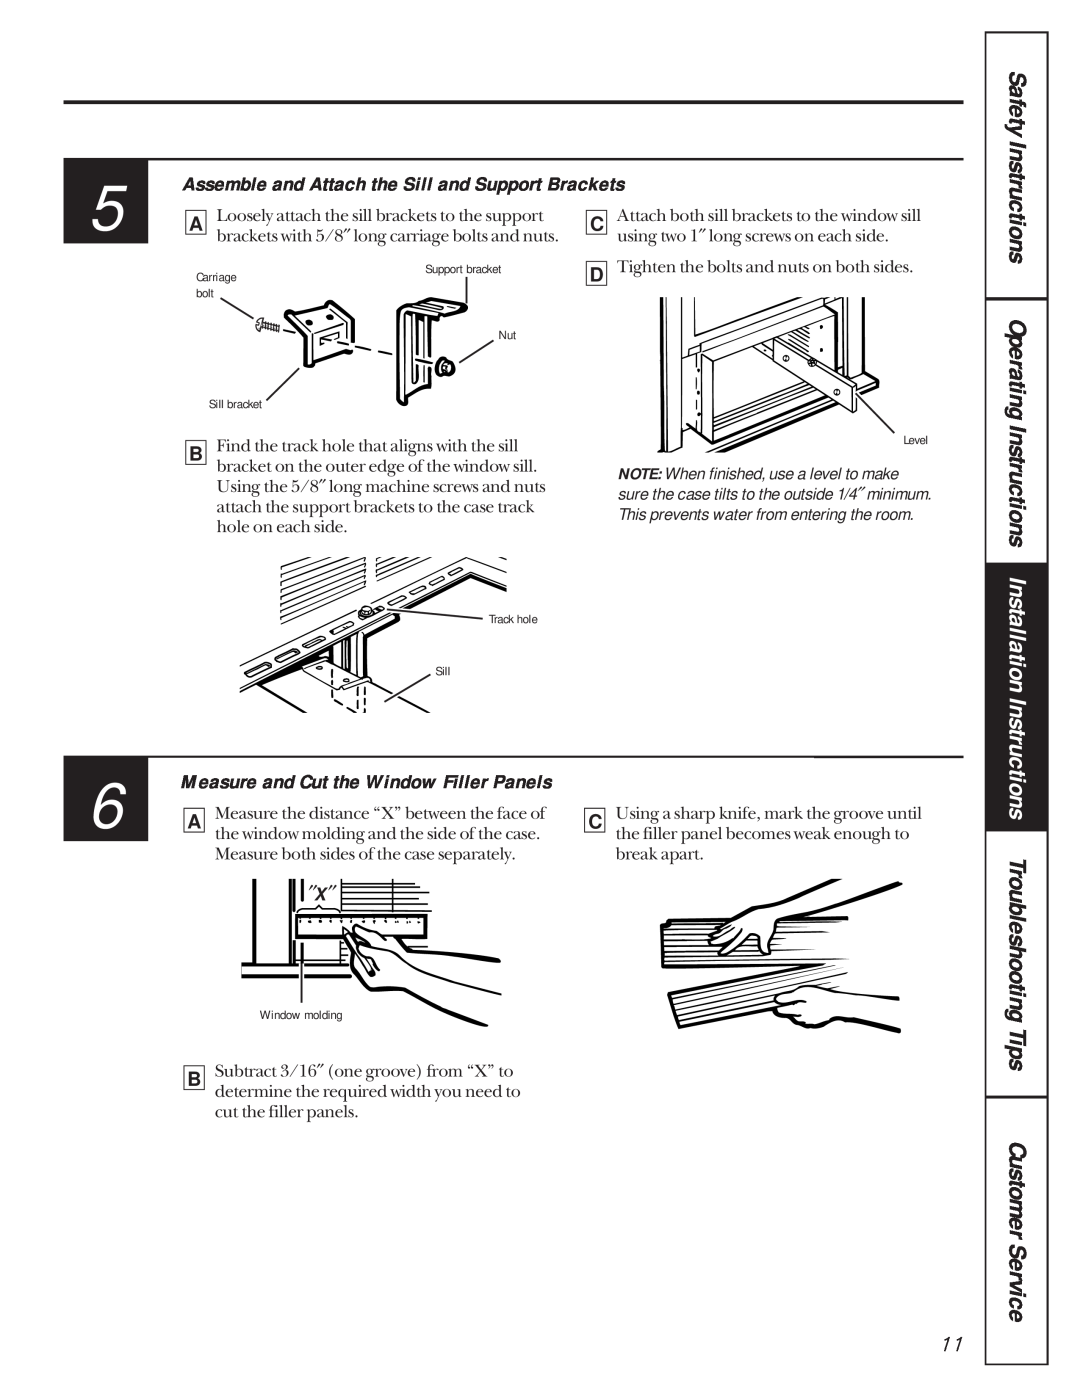 GE AVE18 Customer Service, Installation Instructions Troubleshooting Tips, Measure and Cut the Window Filler Panels 